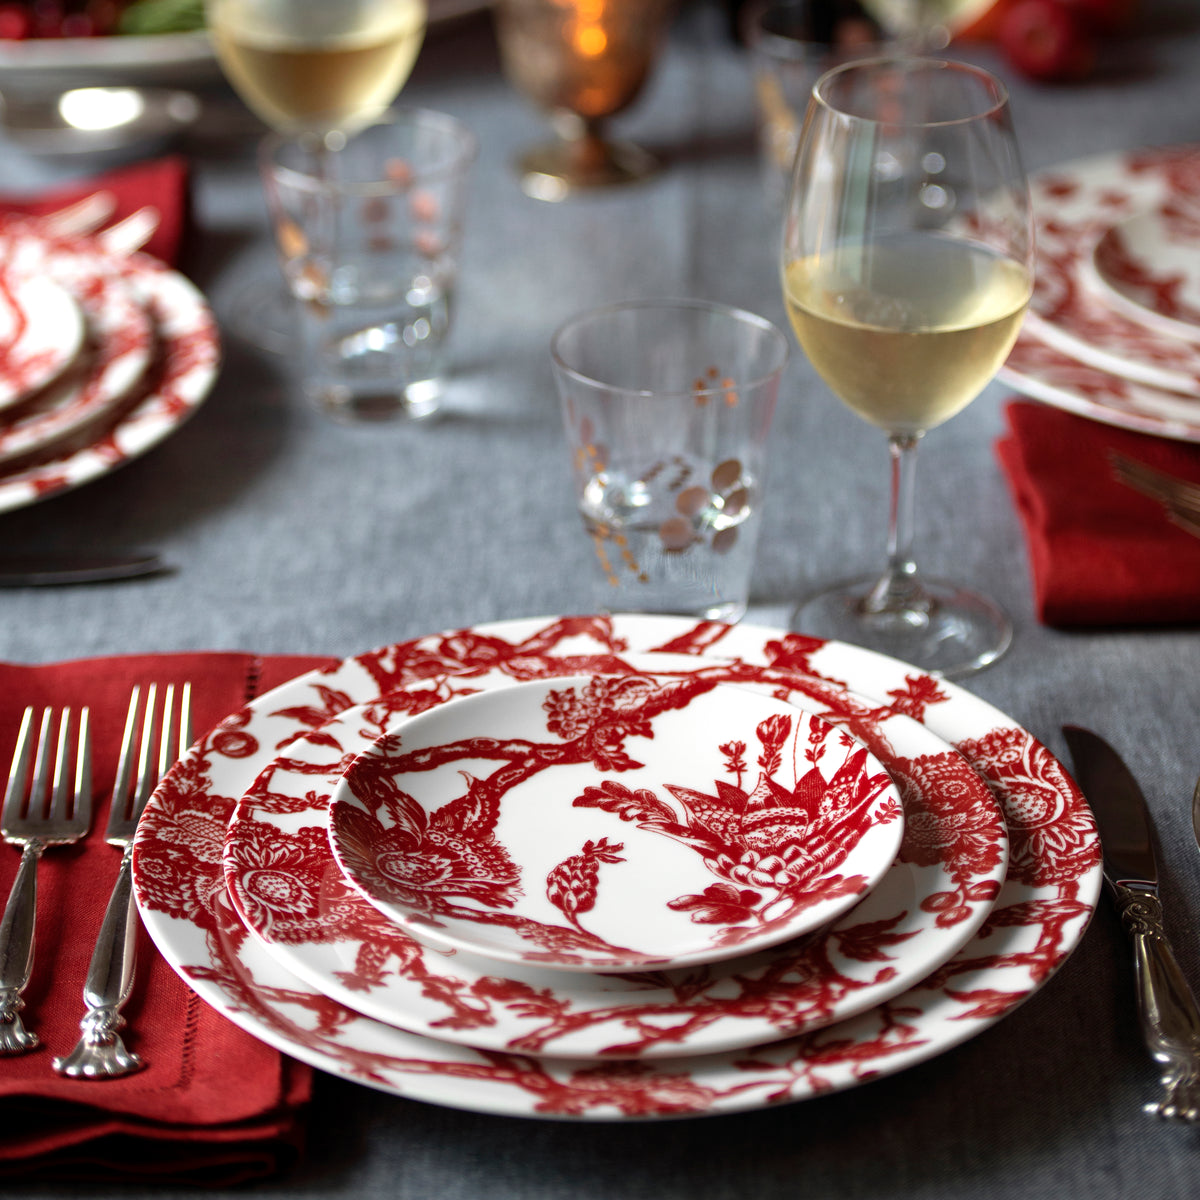 Elegant table setting featuring Caskata Artisanal Home&#39;s Arcadia Crimson Rimmed Salad Plate, silverware on red napkins, and filled wine glasses on a gray tablecloth, evoking an heirloom feel.